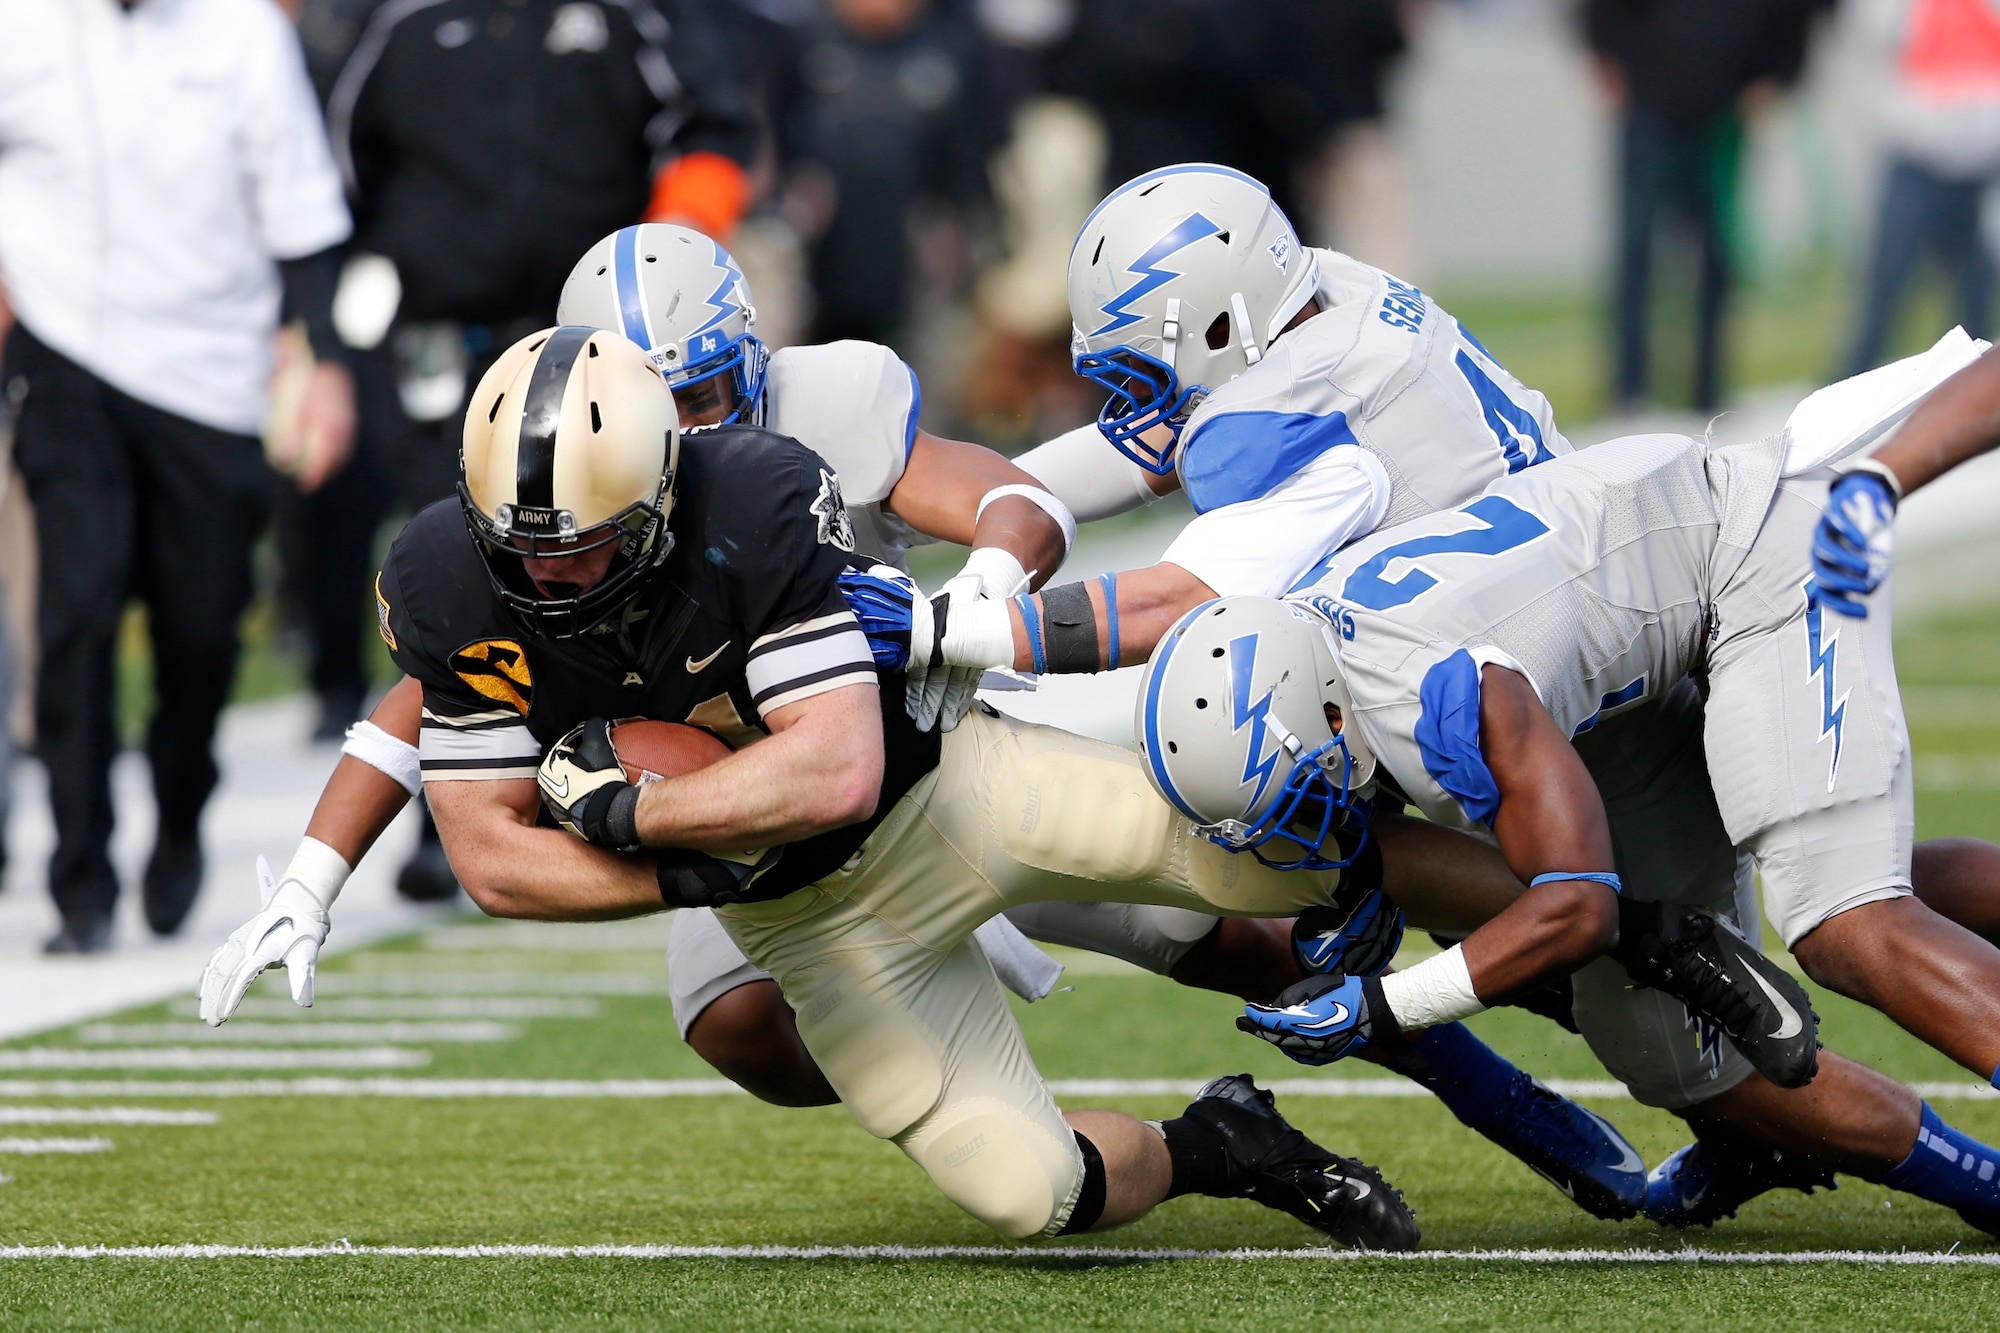 Air Force defenders bring down Army receiver Patrick Laird after a pass from Army quarterback Trent Steelman during the Falcons' game against the Black Knights at Michie Stadium in West Point, N.Y., Nov. 3, 2012. Air Force lost to Army, 41-21, marking the Falcons' first defeat to Army since 2005. (U.S. Army photo/Tommy Gilligan)